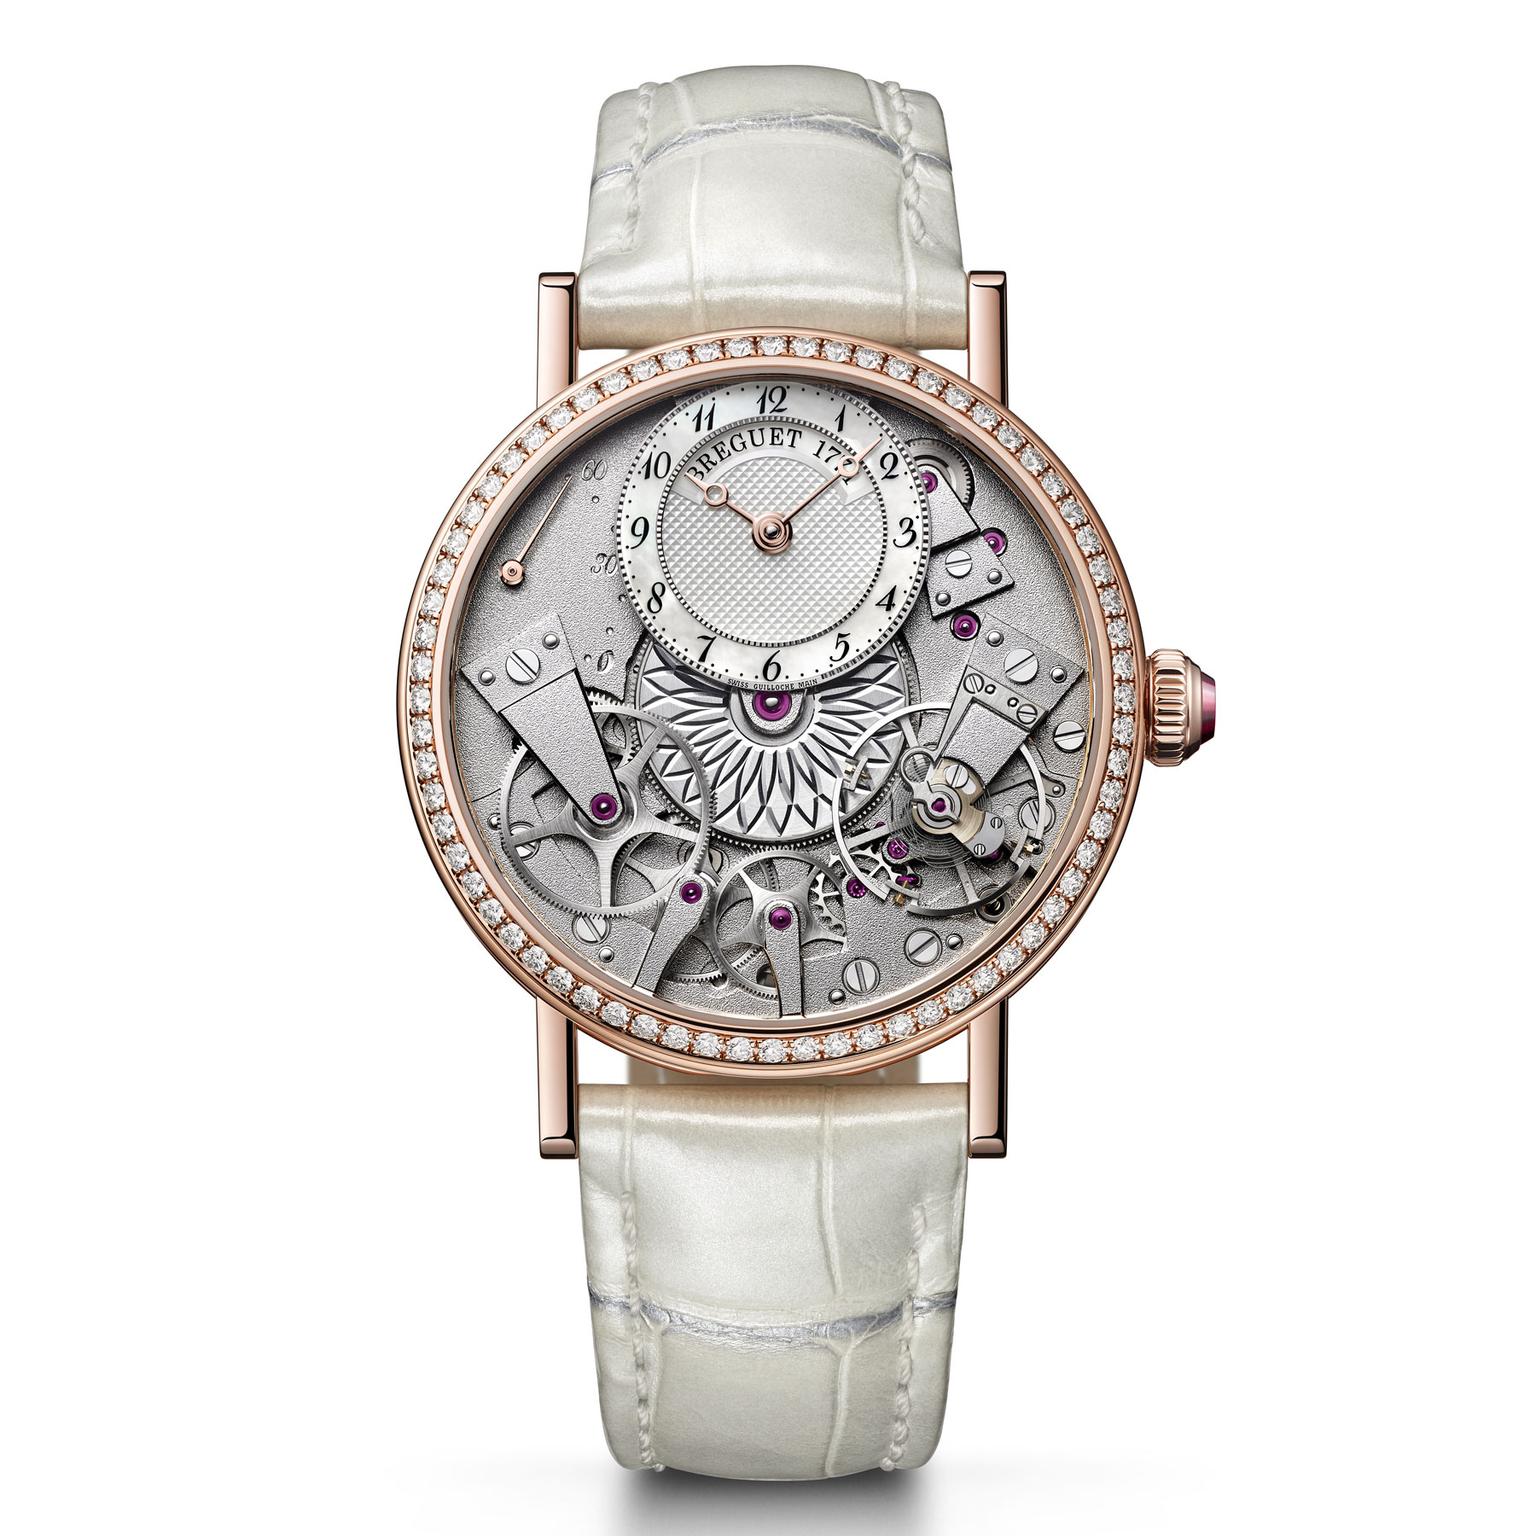 Most beautiful women’s watches at Baselworld